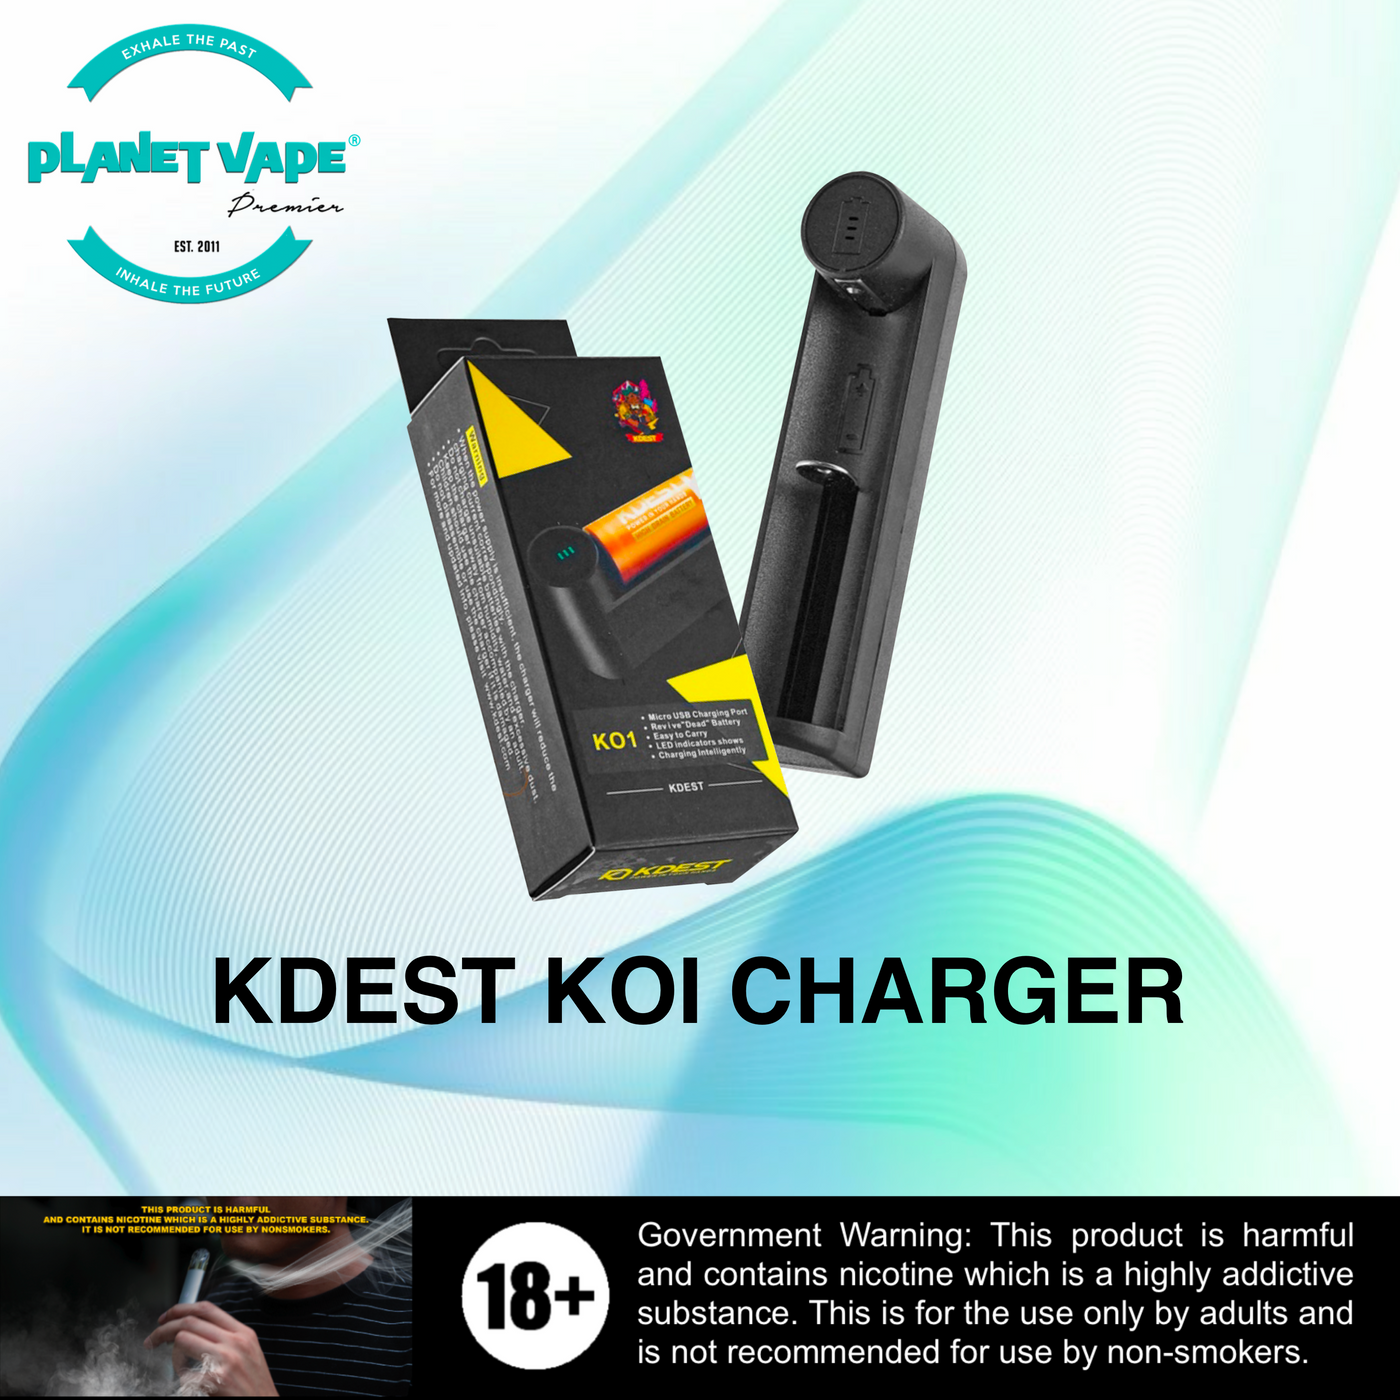 KO1 Charger (by Kdest)